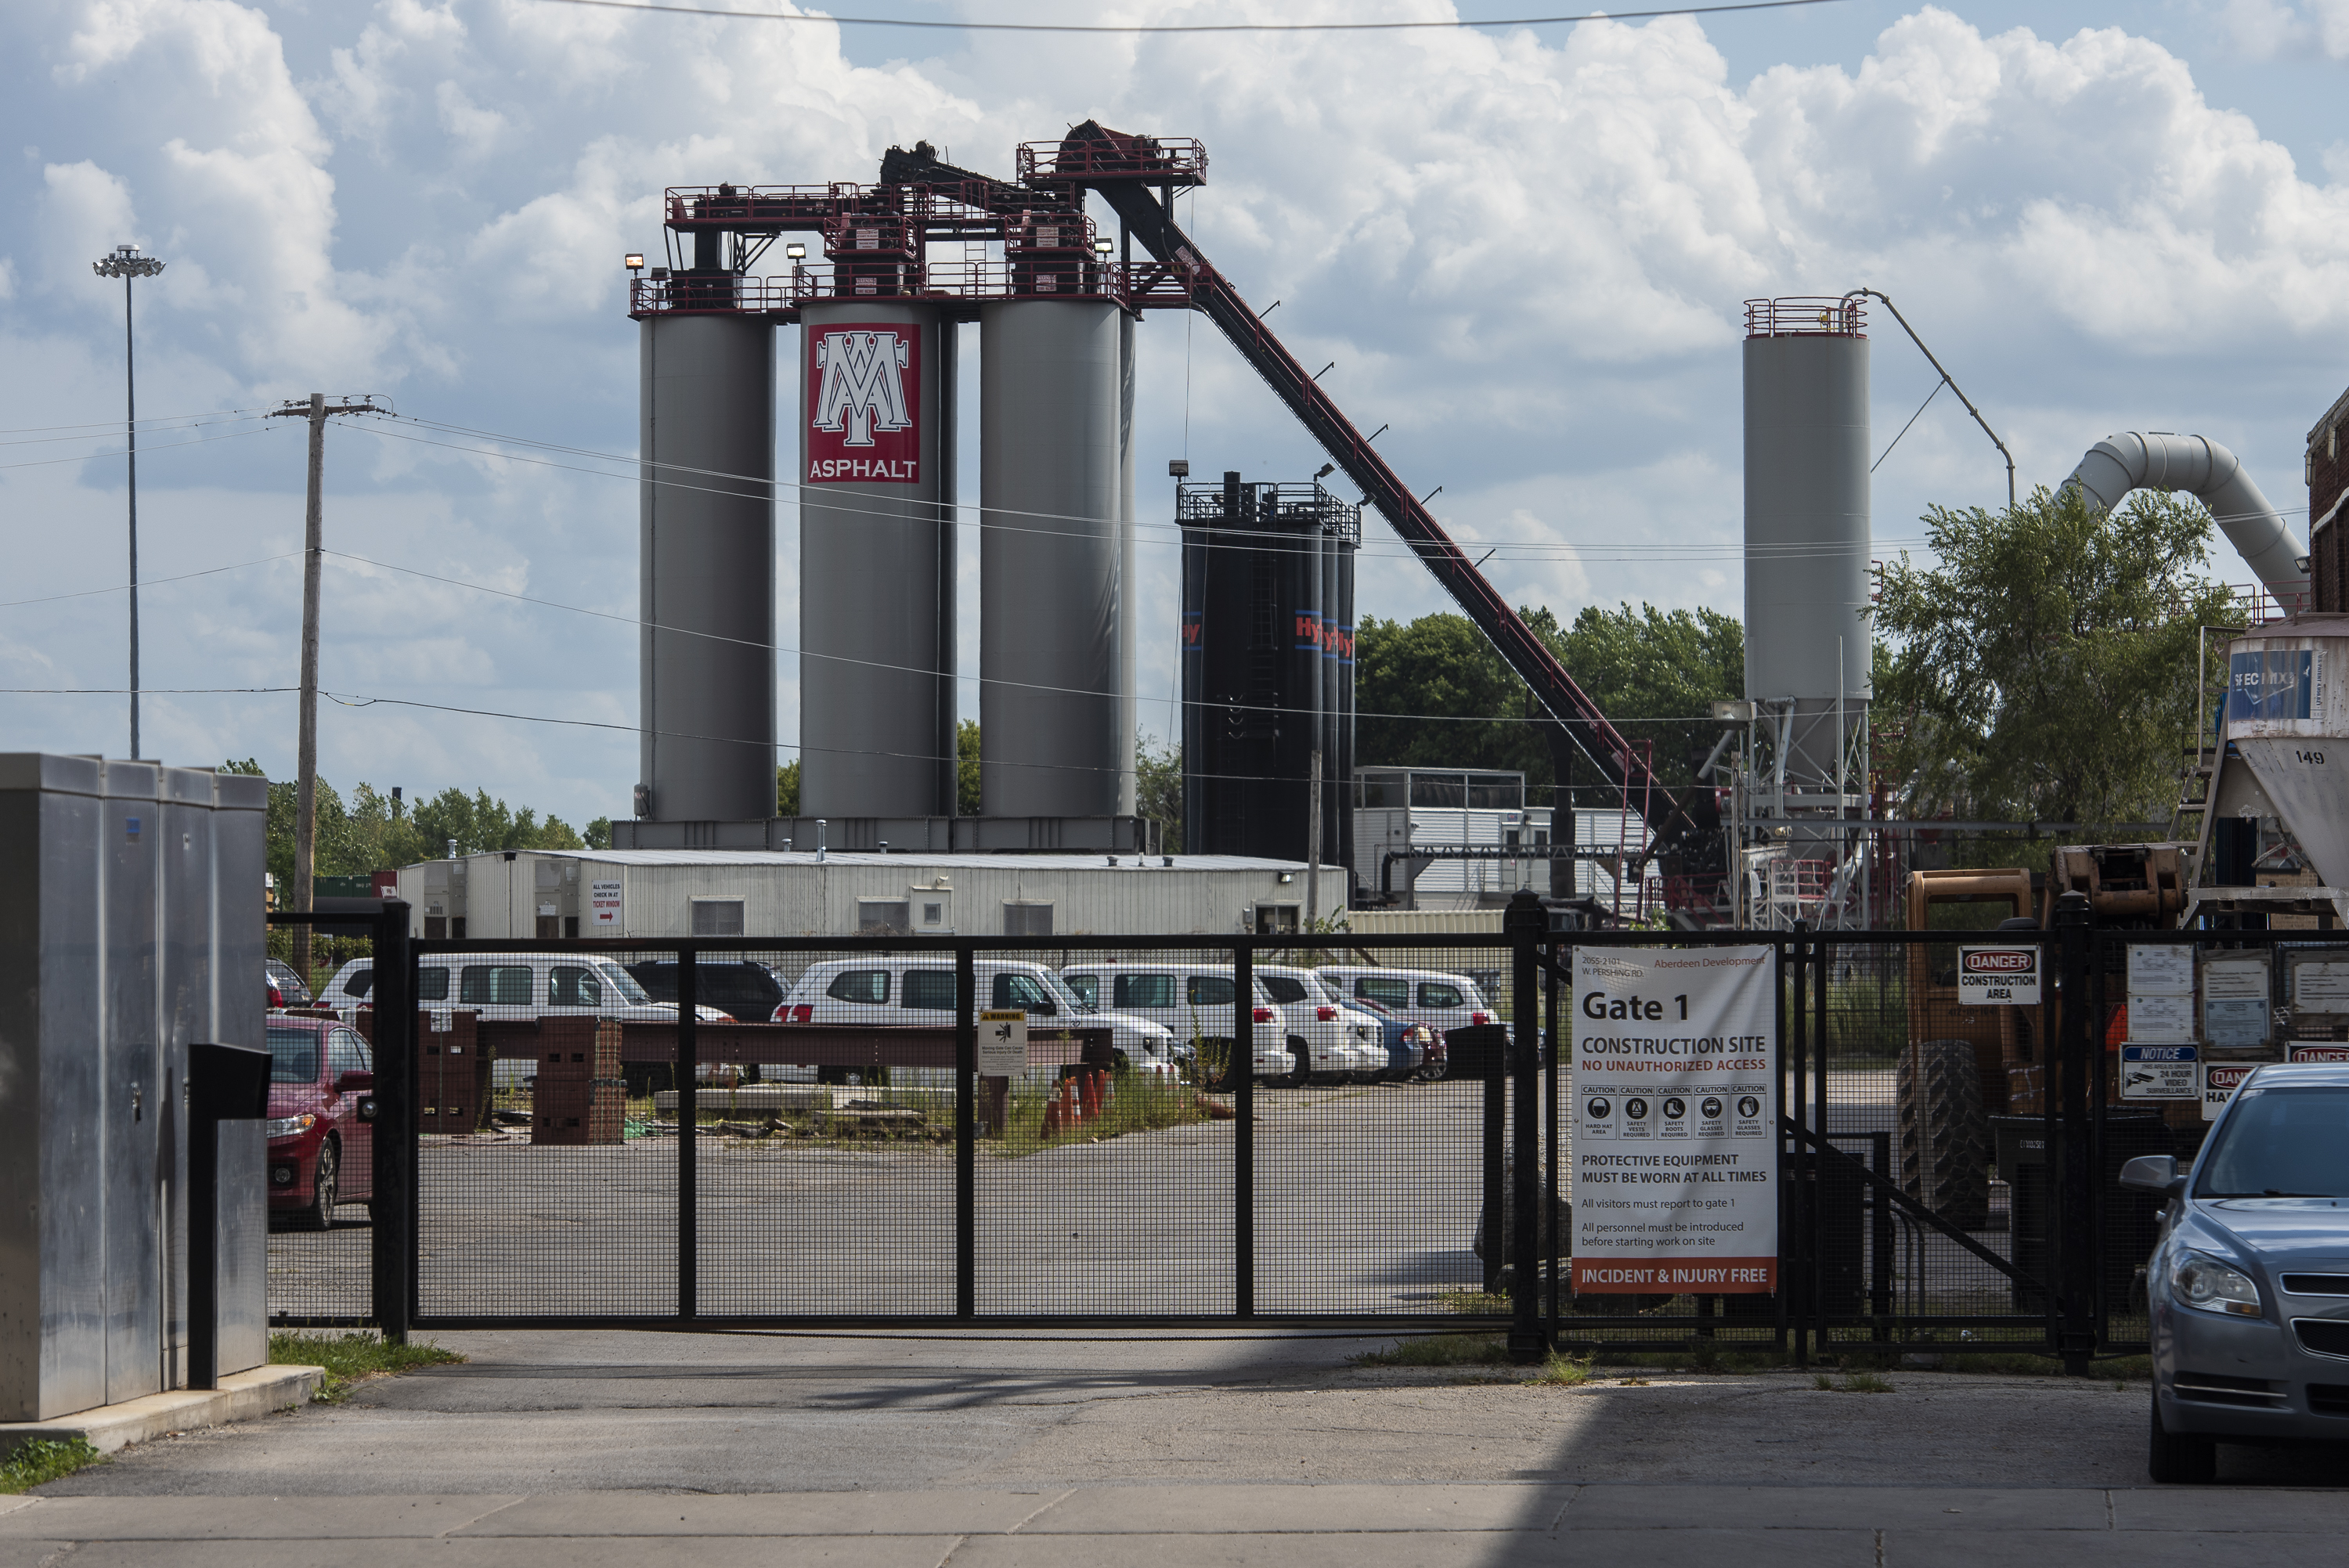 Mayor Lori Lightfoot’s chief sustainability officer cited an asphalt plant that opened directly across from McKinley Park two years ago as an example of an industrial zoning issue that would get more public scrutiny under the mayor’s proposed ordinance.